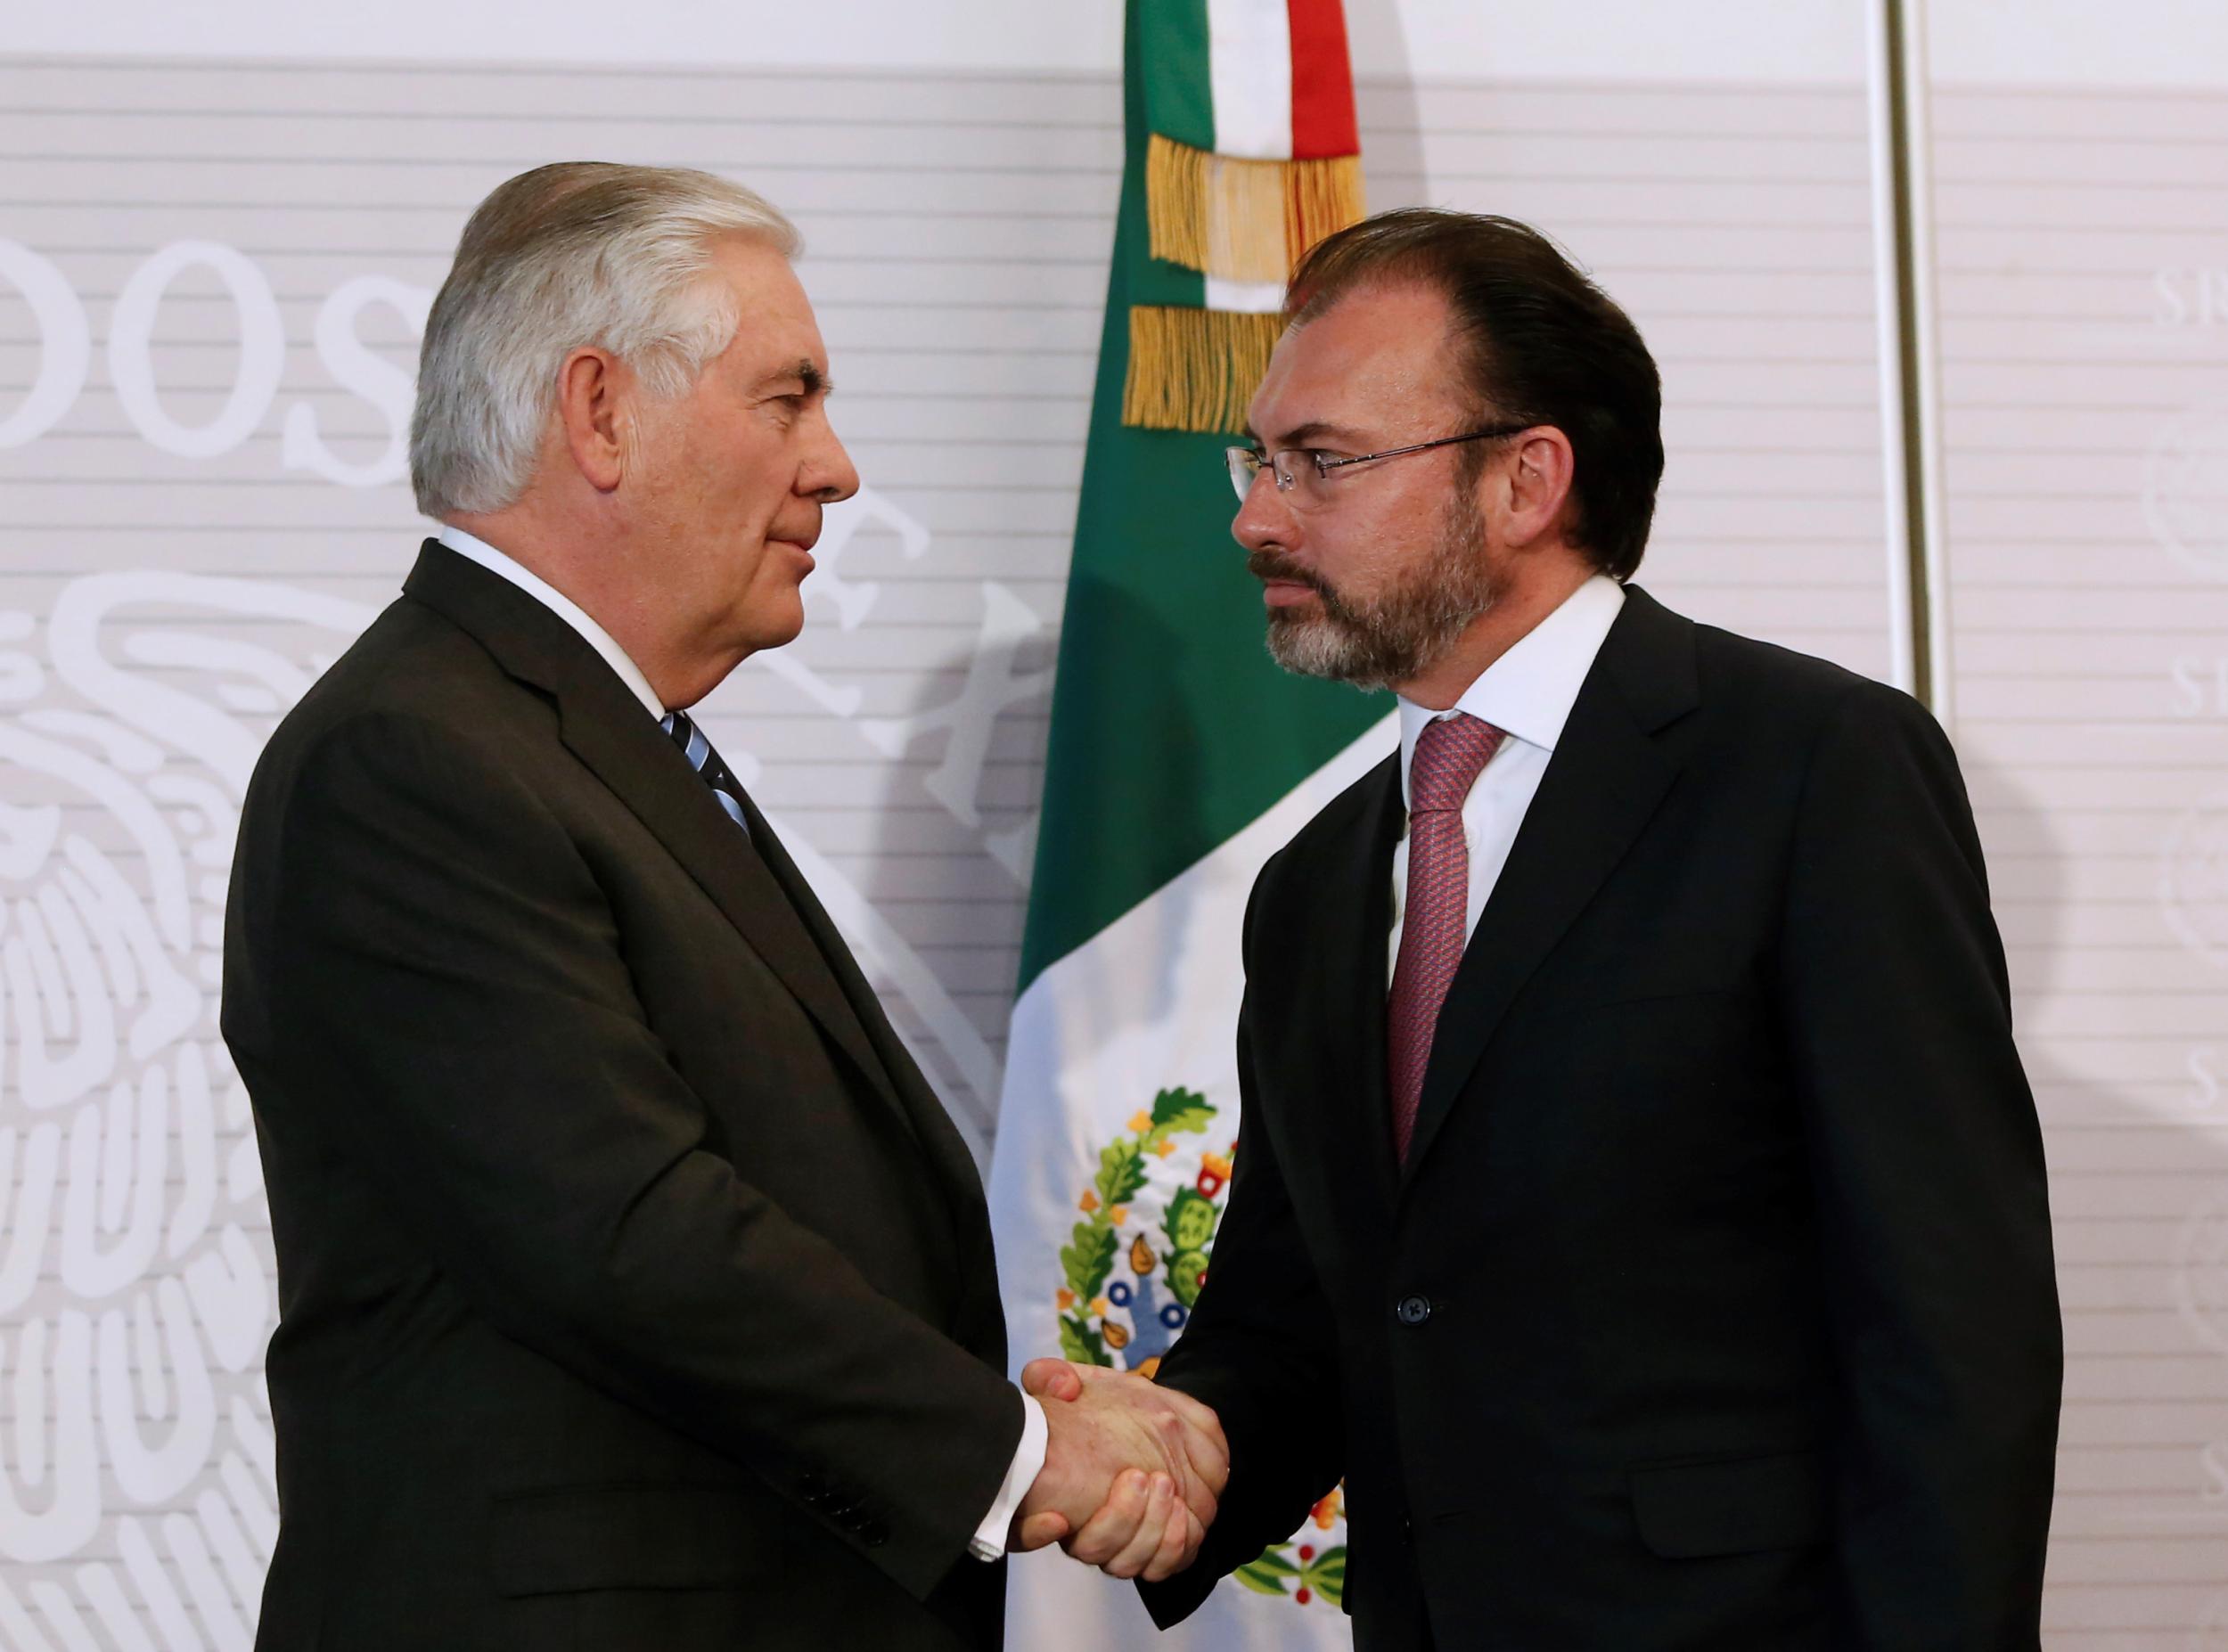 US Secretary of State Rex Tillerson and Mexico's Foreign Minister Luis Videgaray shake hands